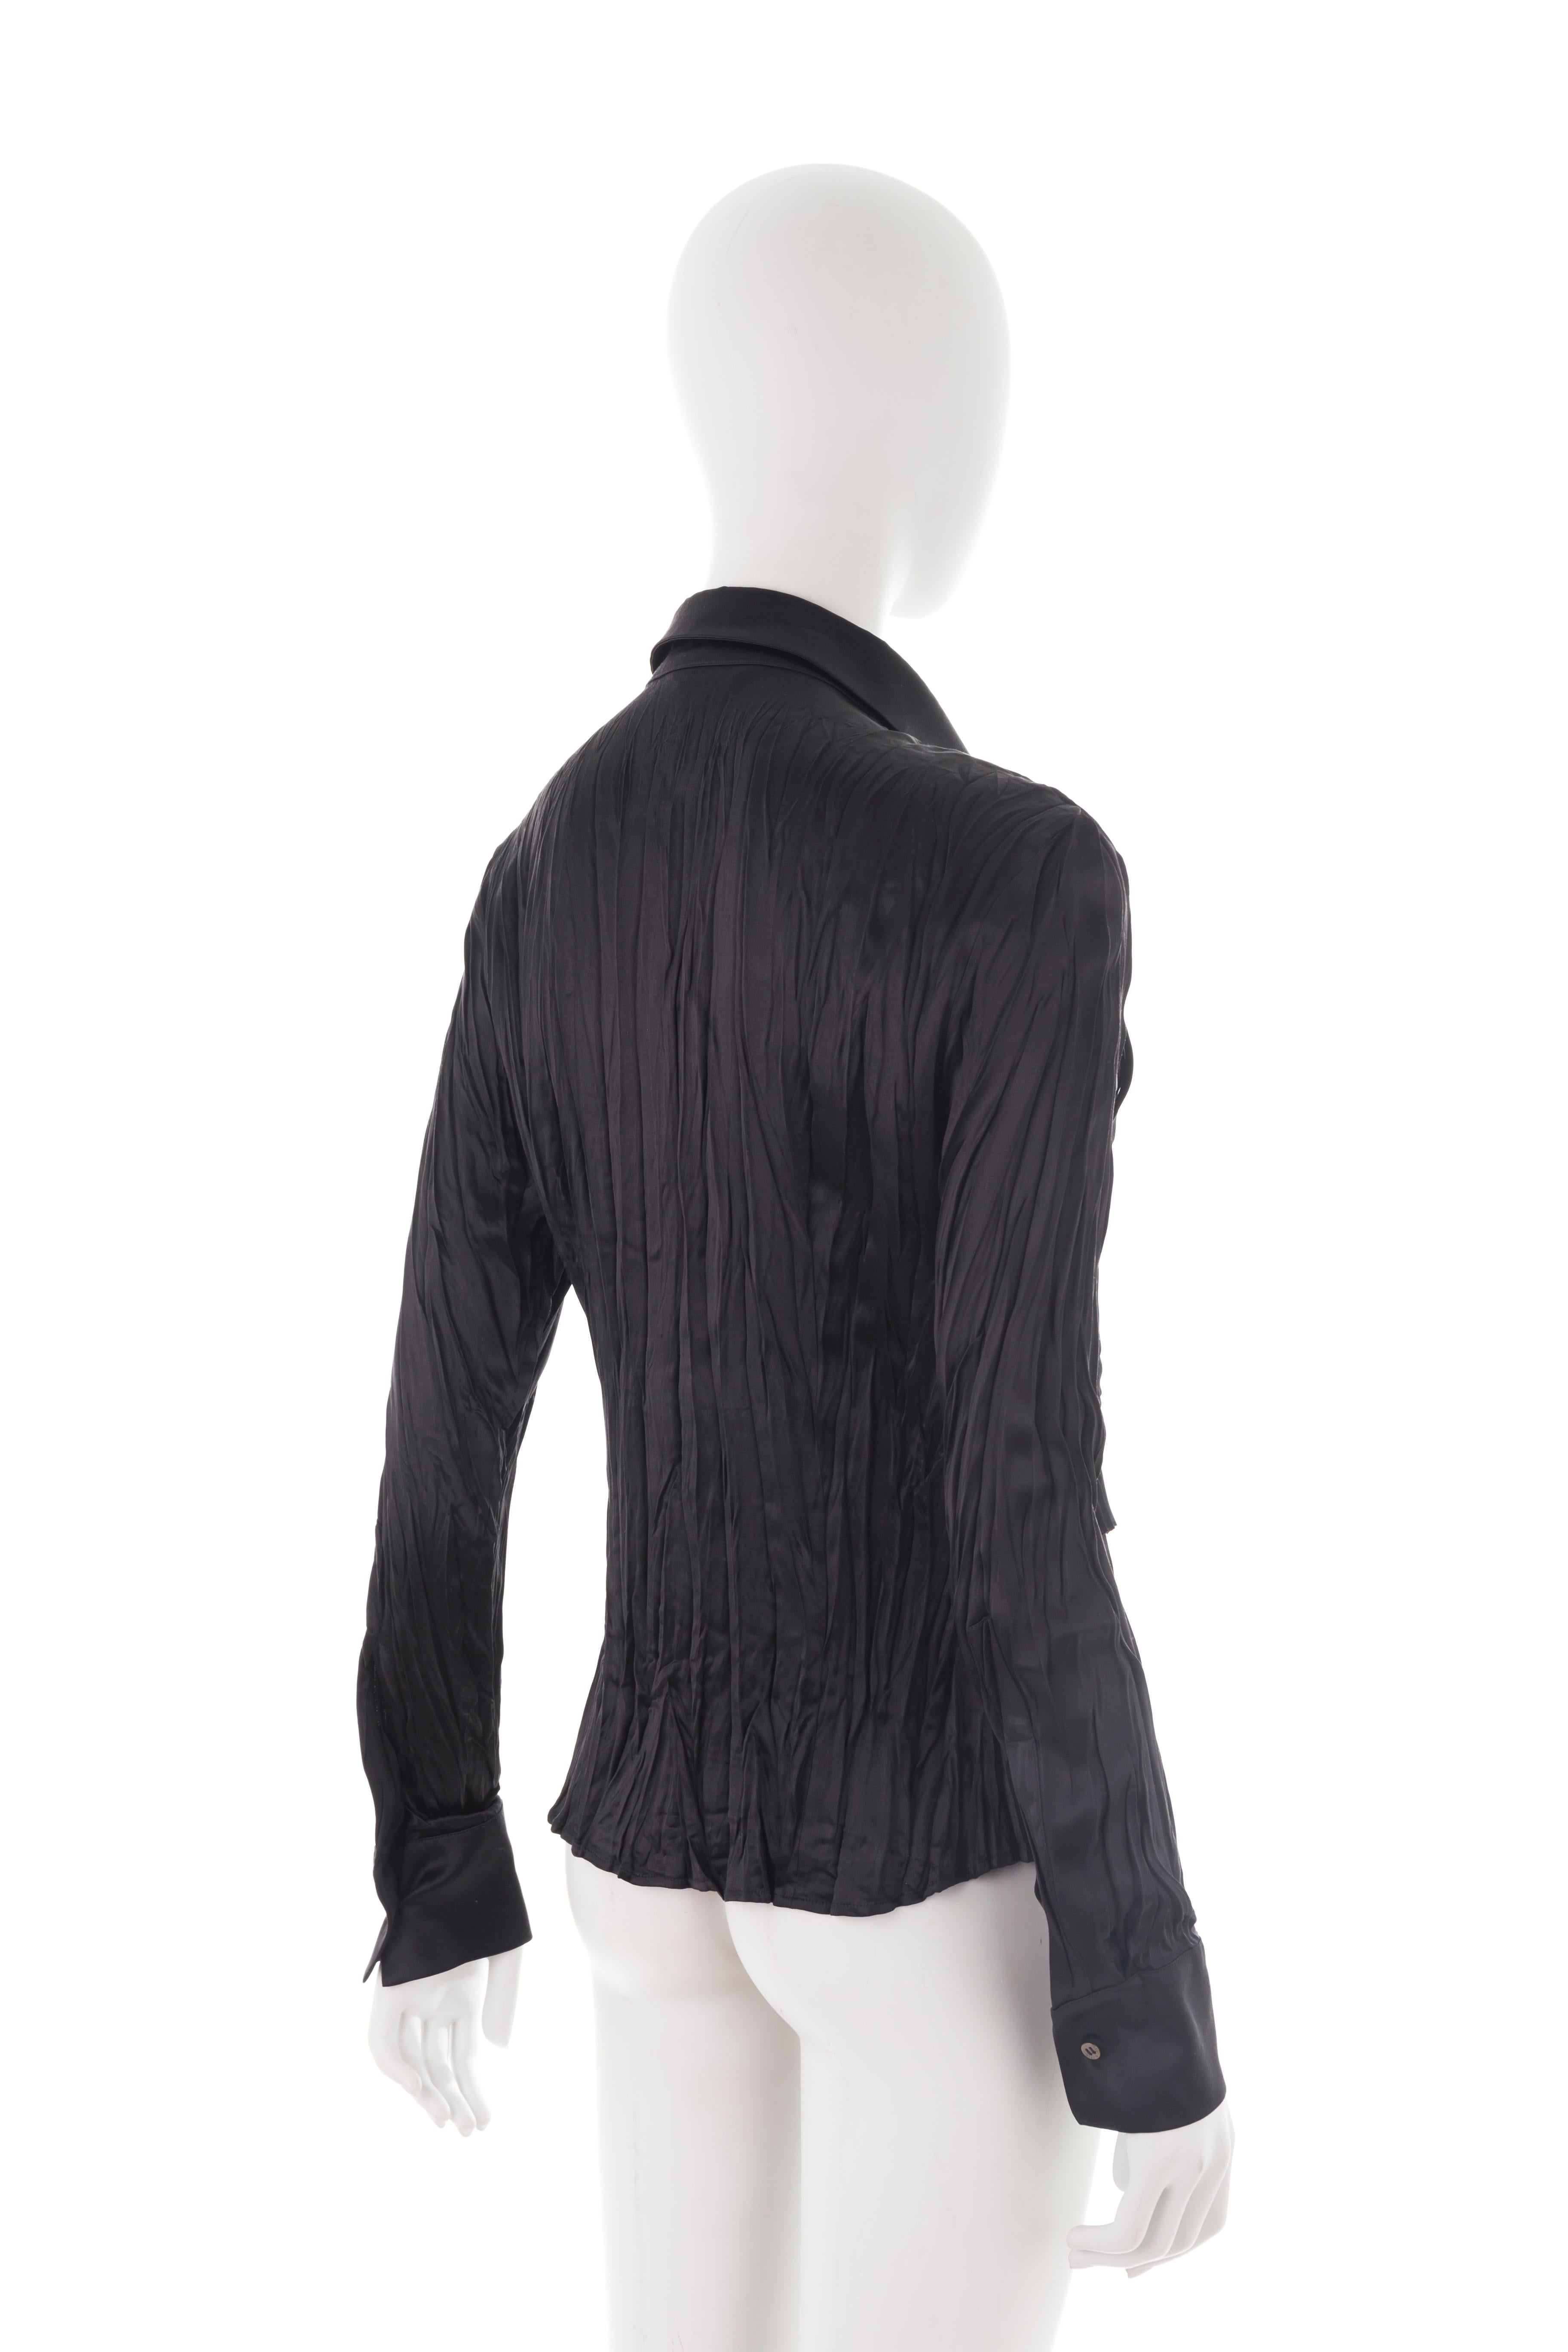 Roberto Cavalli F/W 2005 black studded silk shirt In Excellent Condition For Sale In Rome, IT